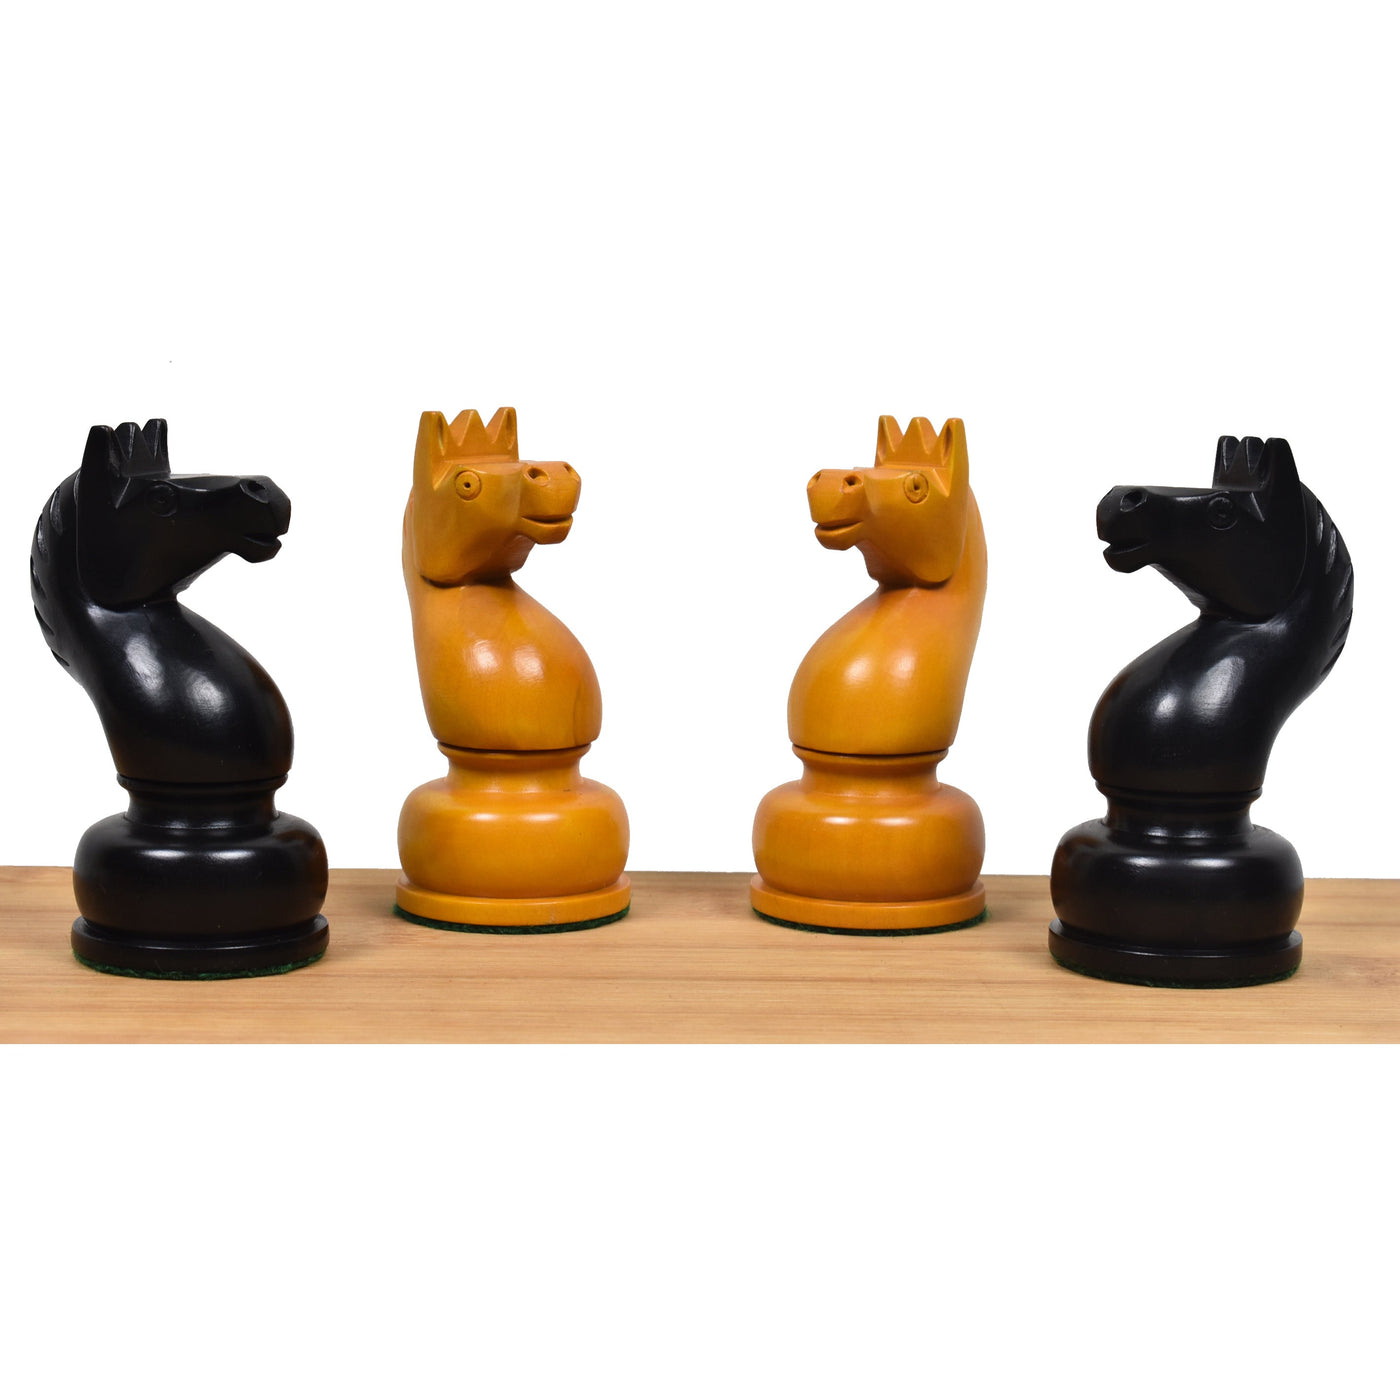 Slightly Imperfect 1960's Soviet Championship Tal Chess Set - Chess Pieces Only - Antiqued Boxwood- 4" King